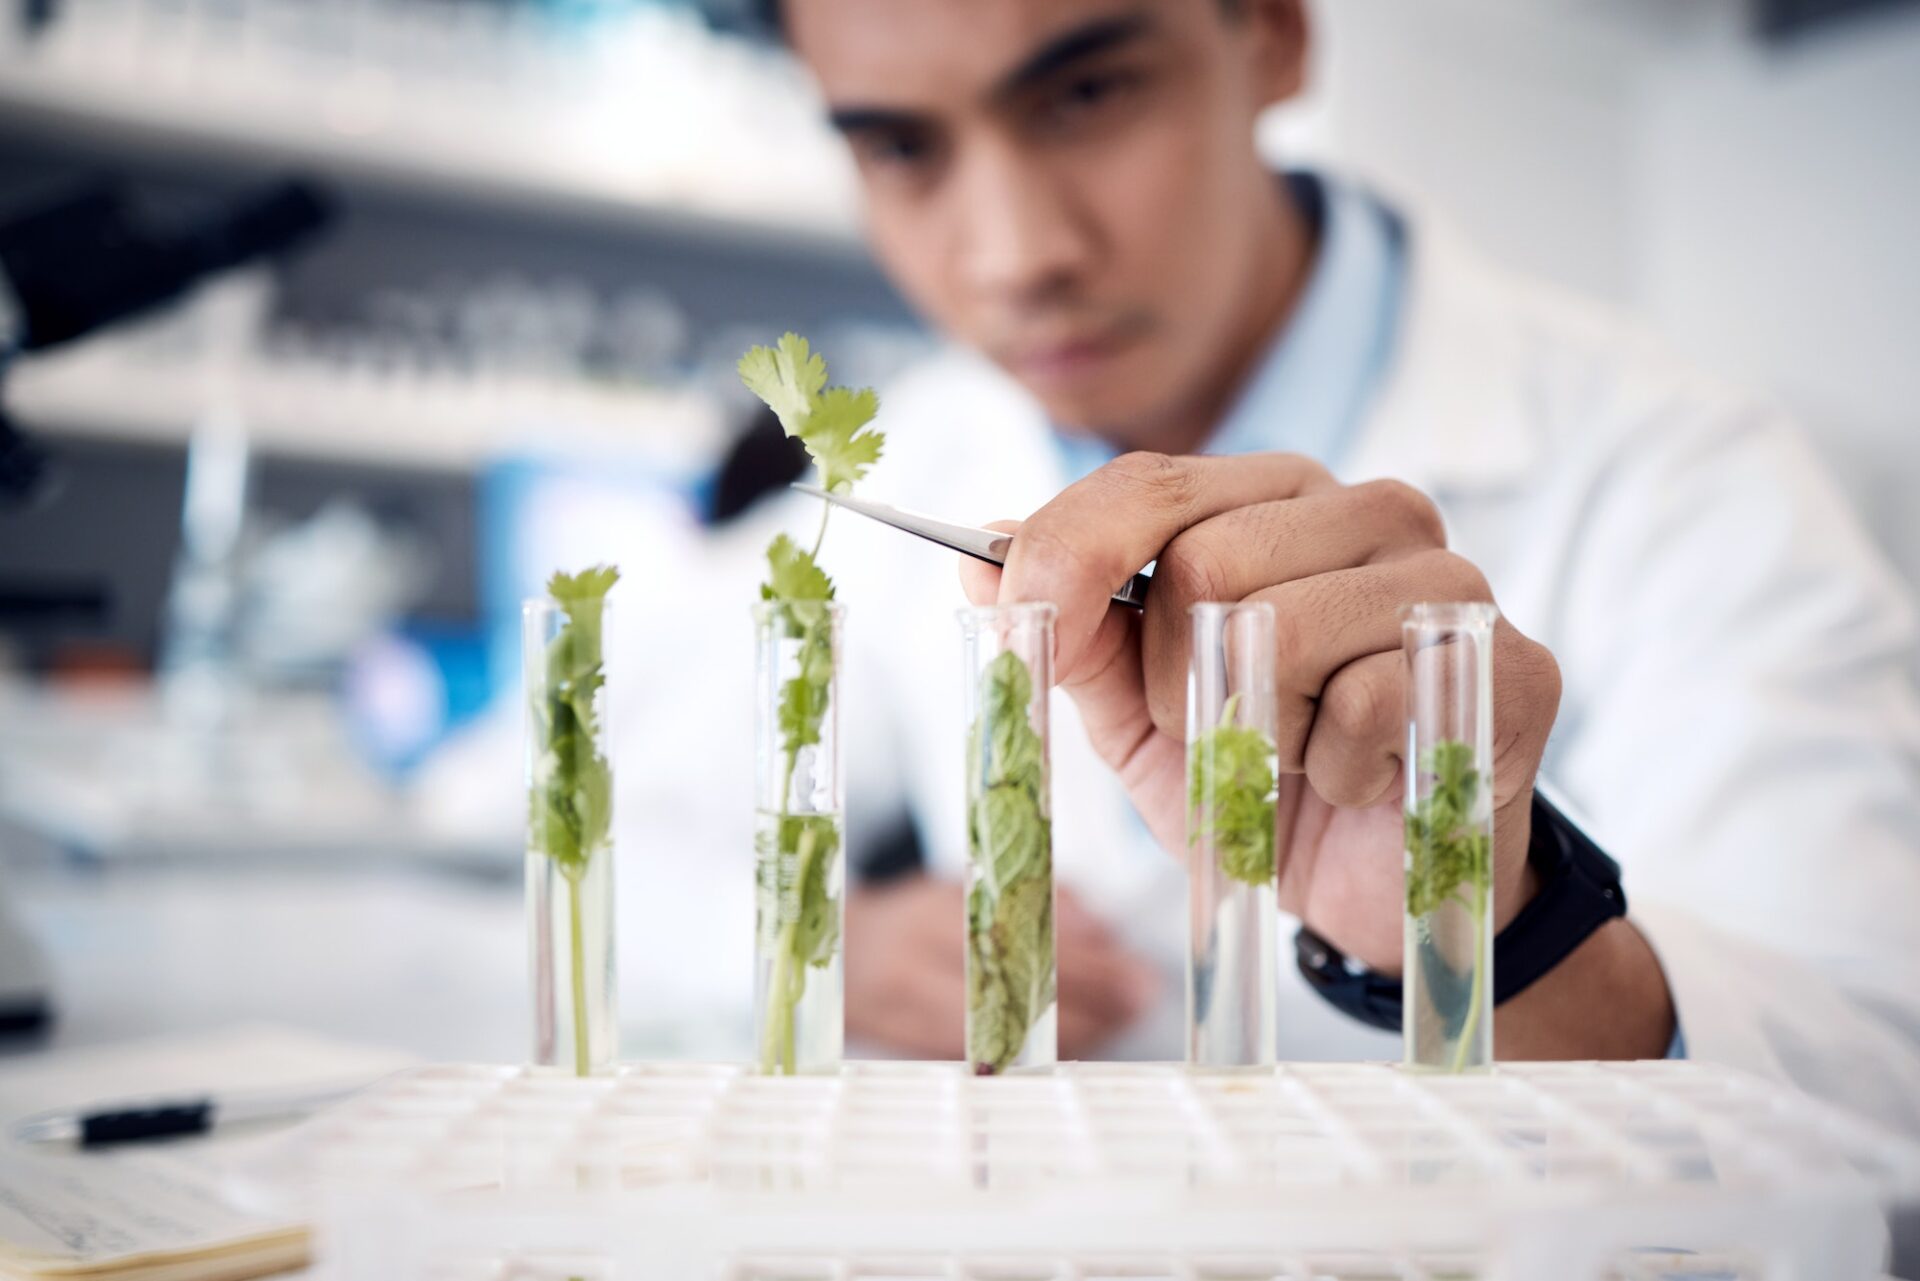 Hands, plant scientist and laboratory test tubes in plant growth research, climate change solution